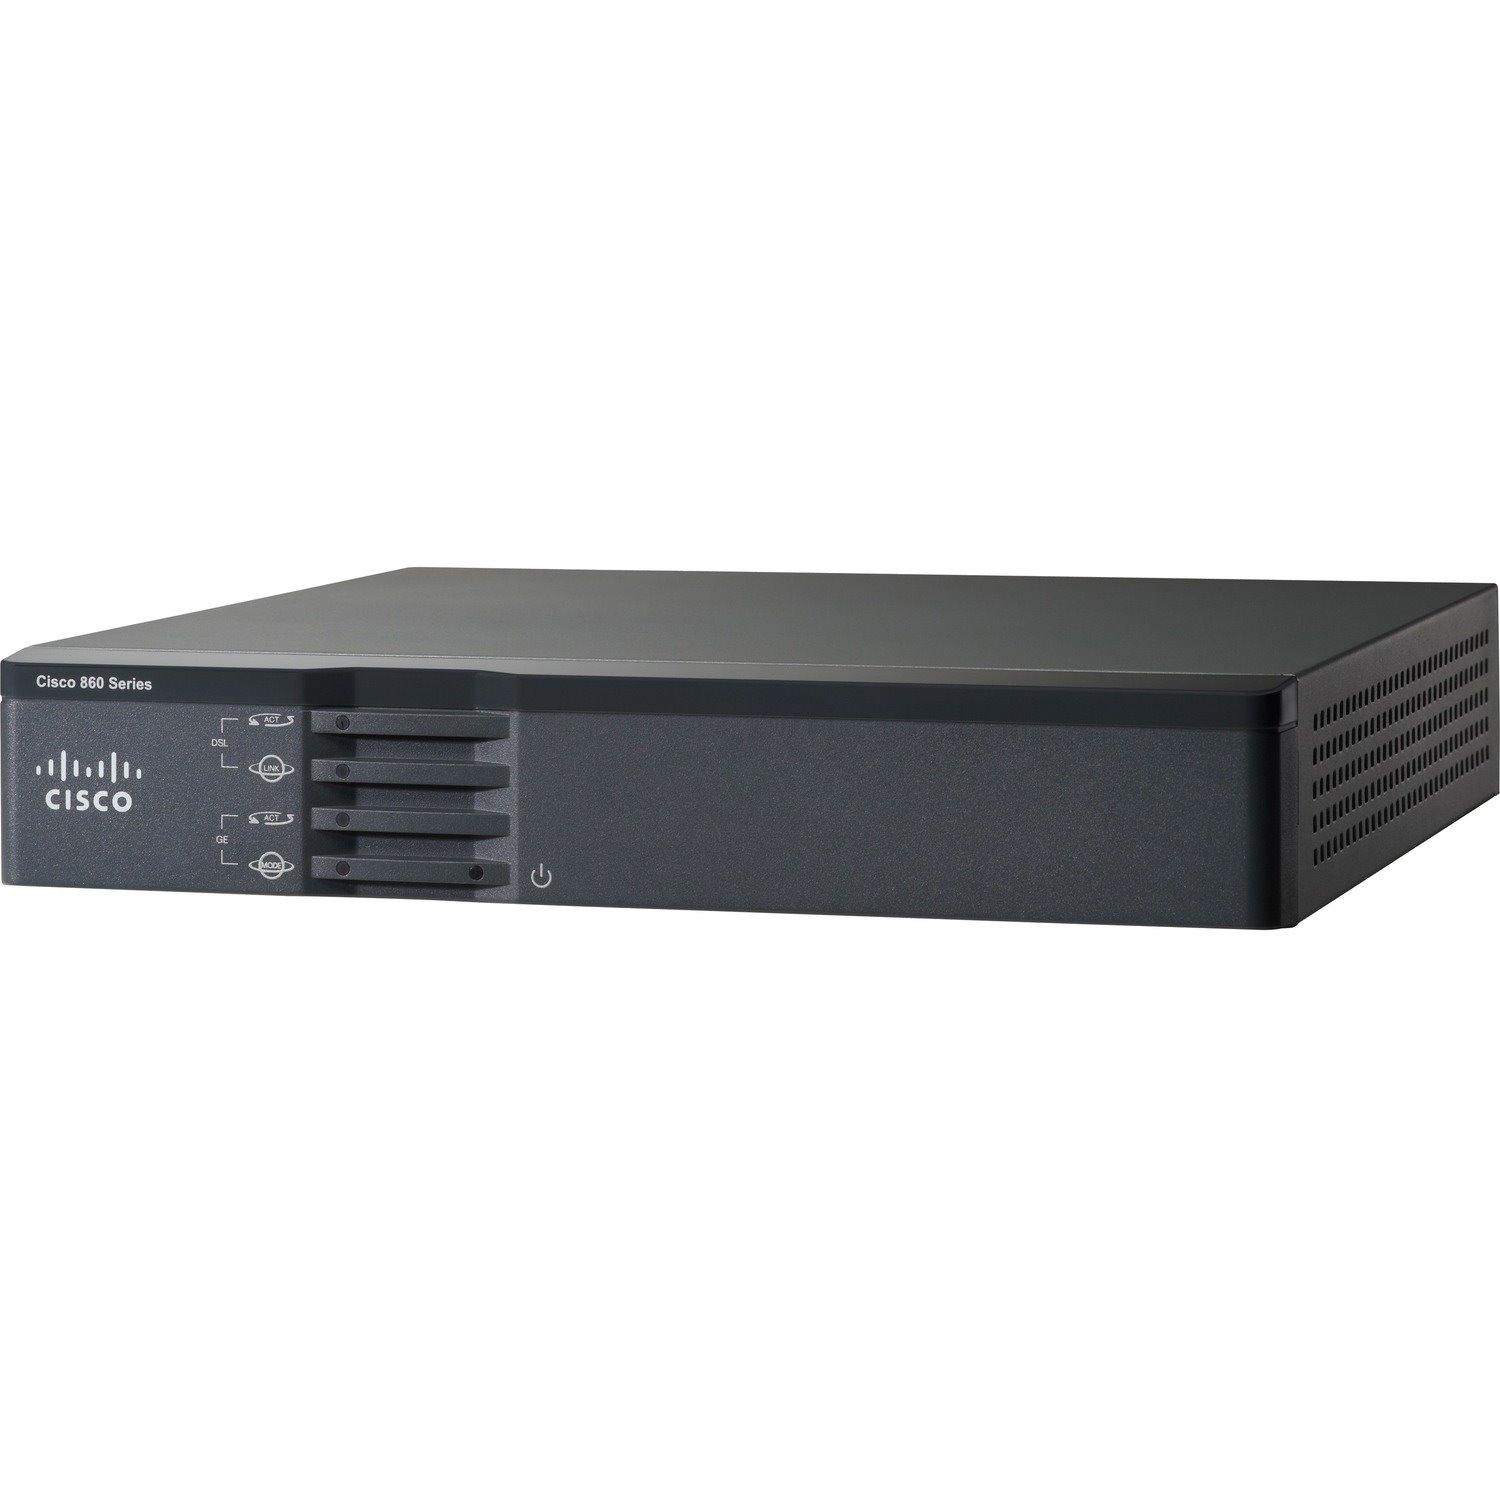 Cisco 866VAE Secure Router with VDSL2/ADSL2+ over ISDN